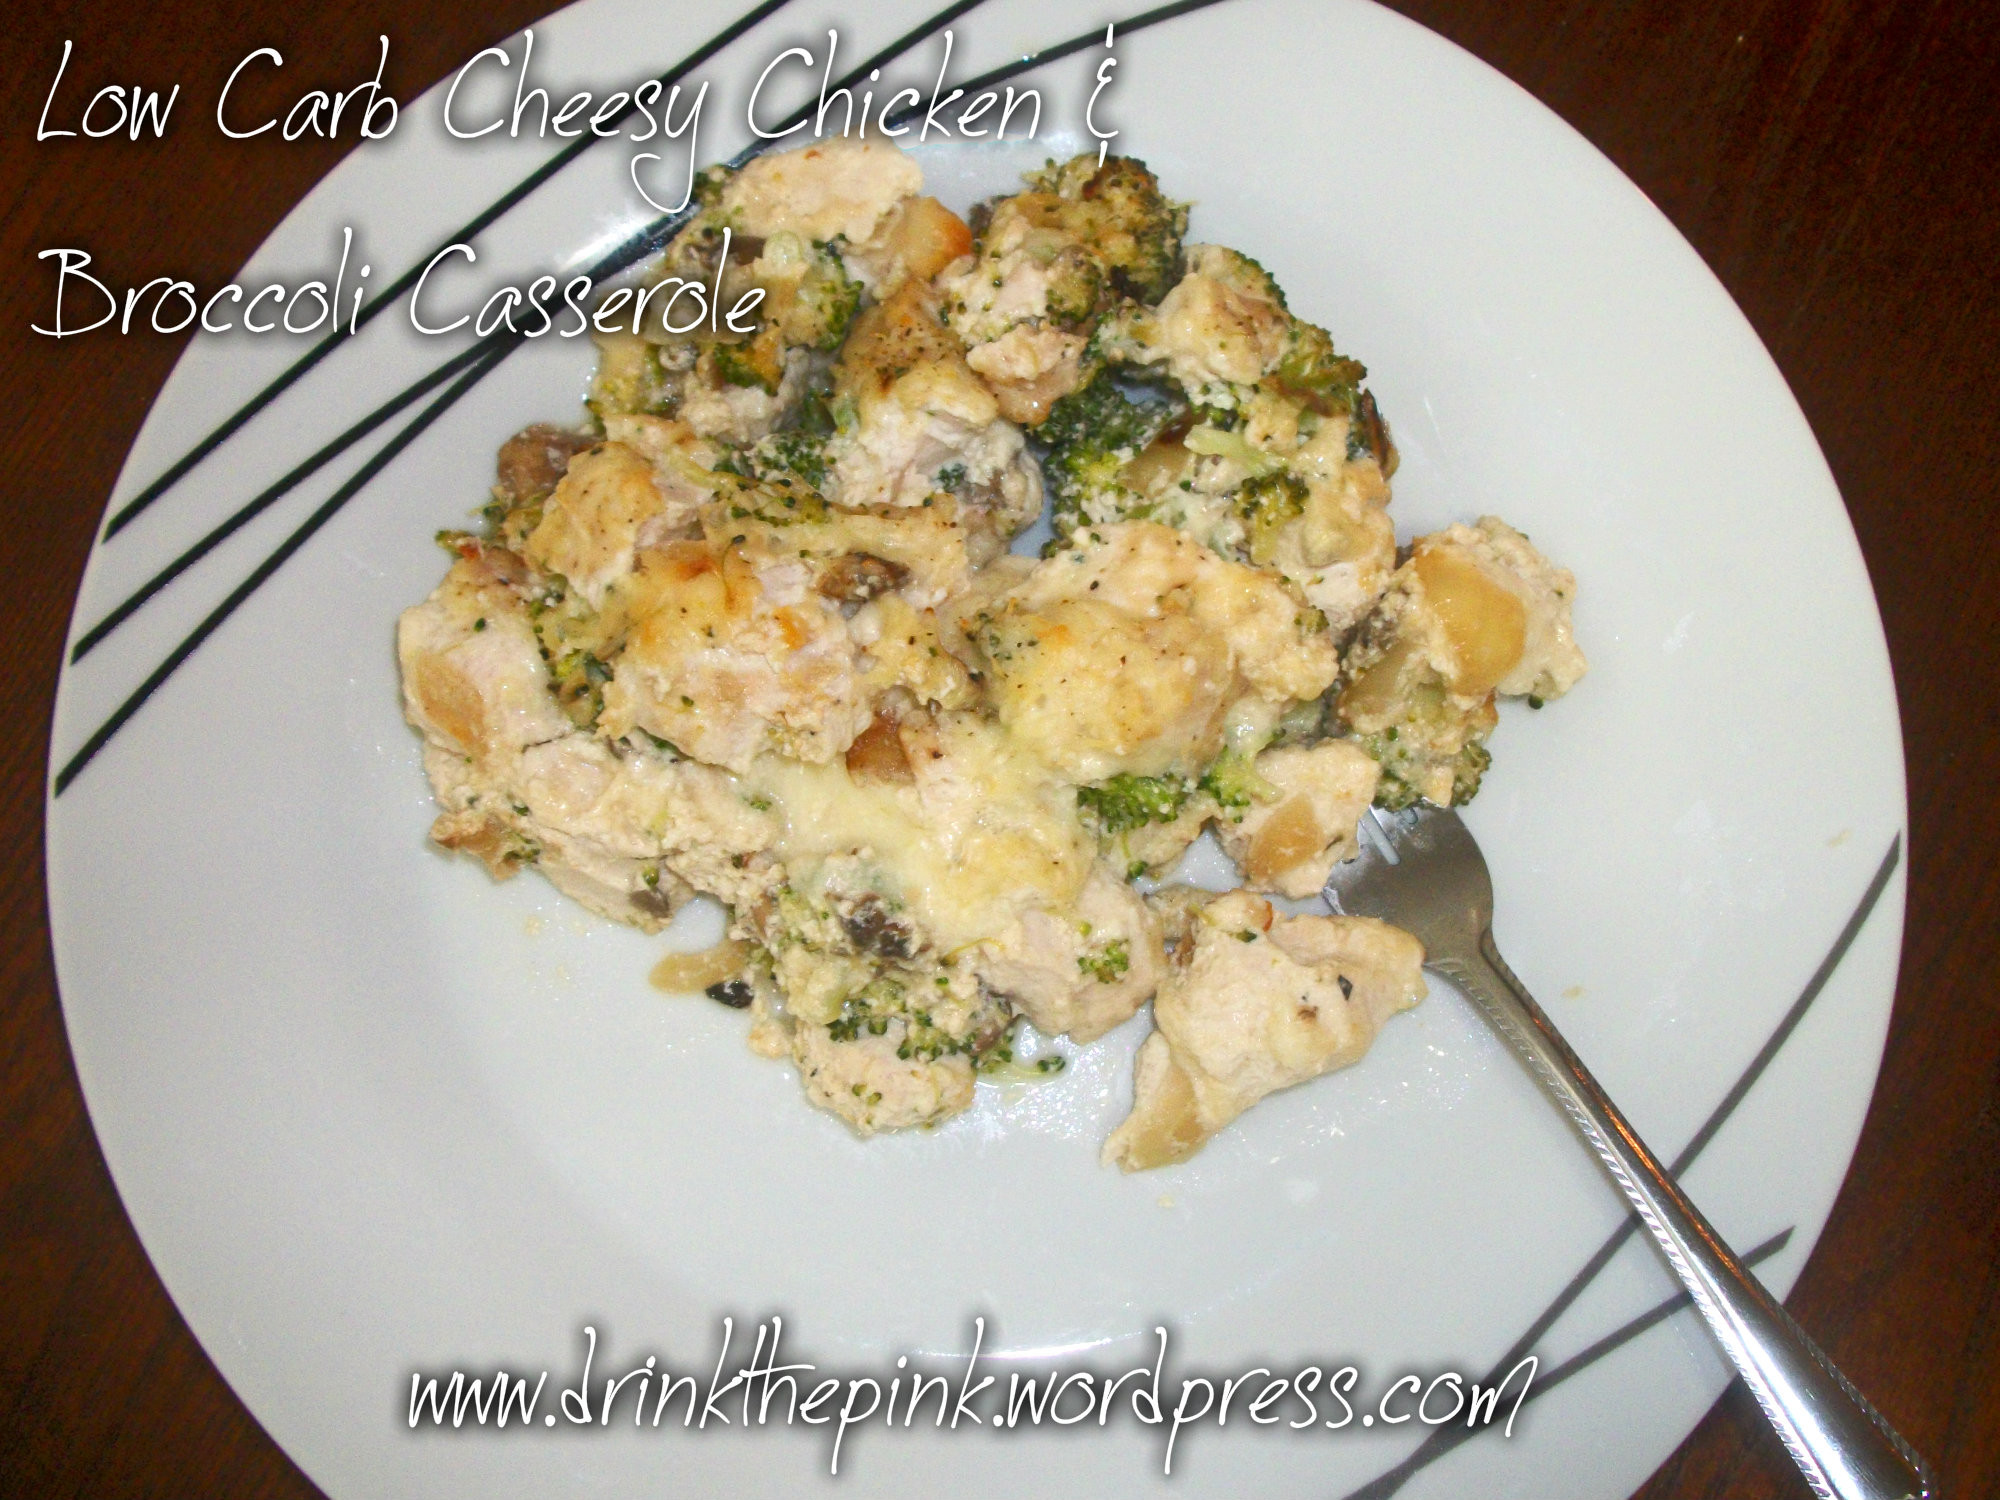 Low Carb Chicken Broccoli Casserole
 Low Carb Cheesy Chicken & Broccoli Casserole Recipe